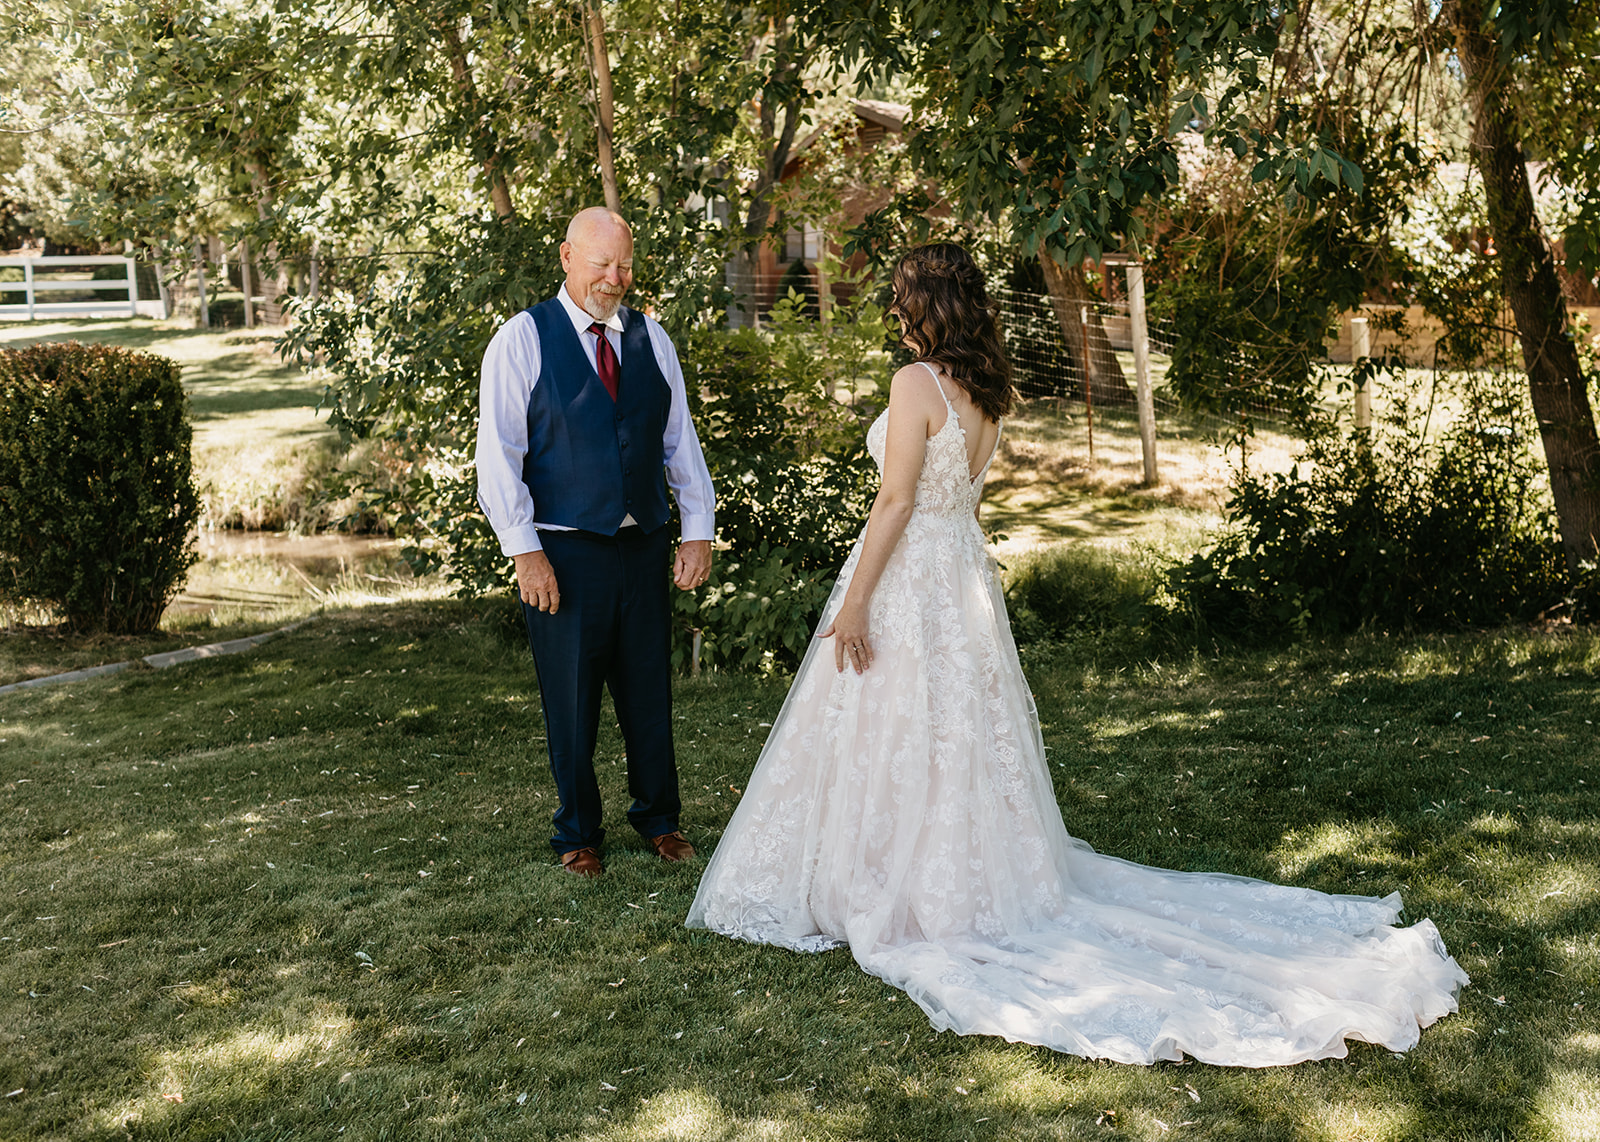 Bride's first look with her dad